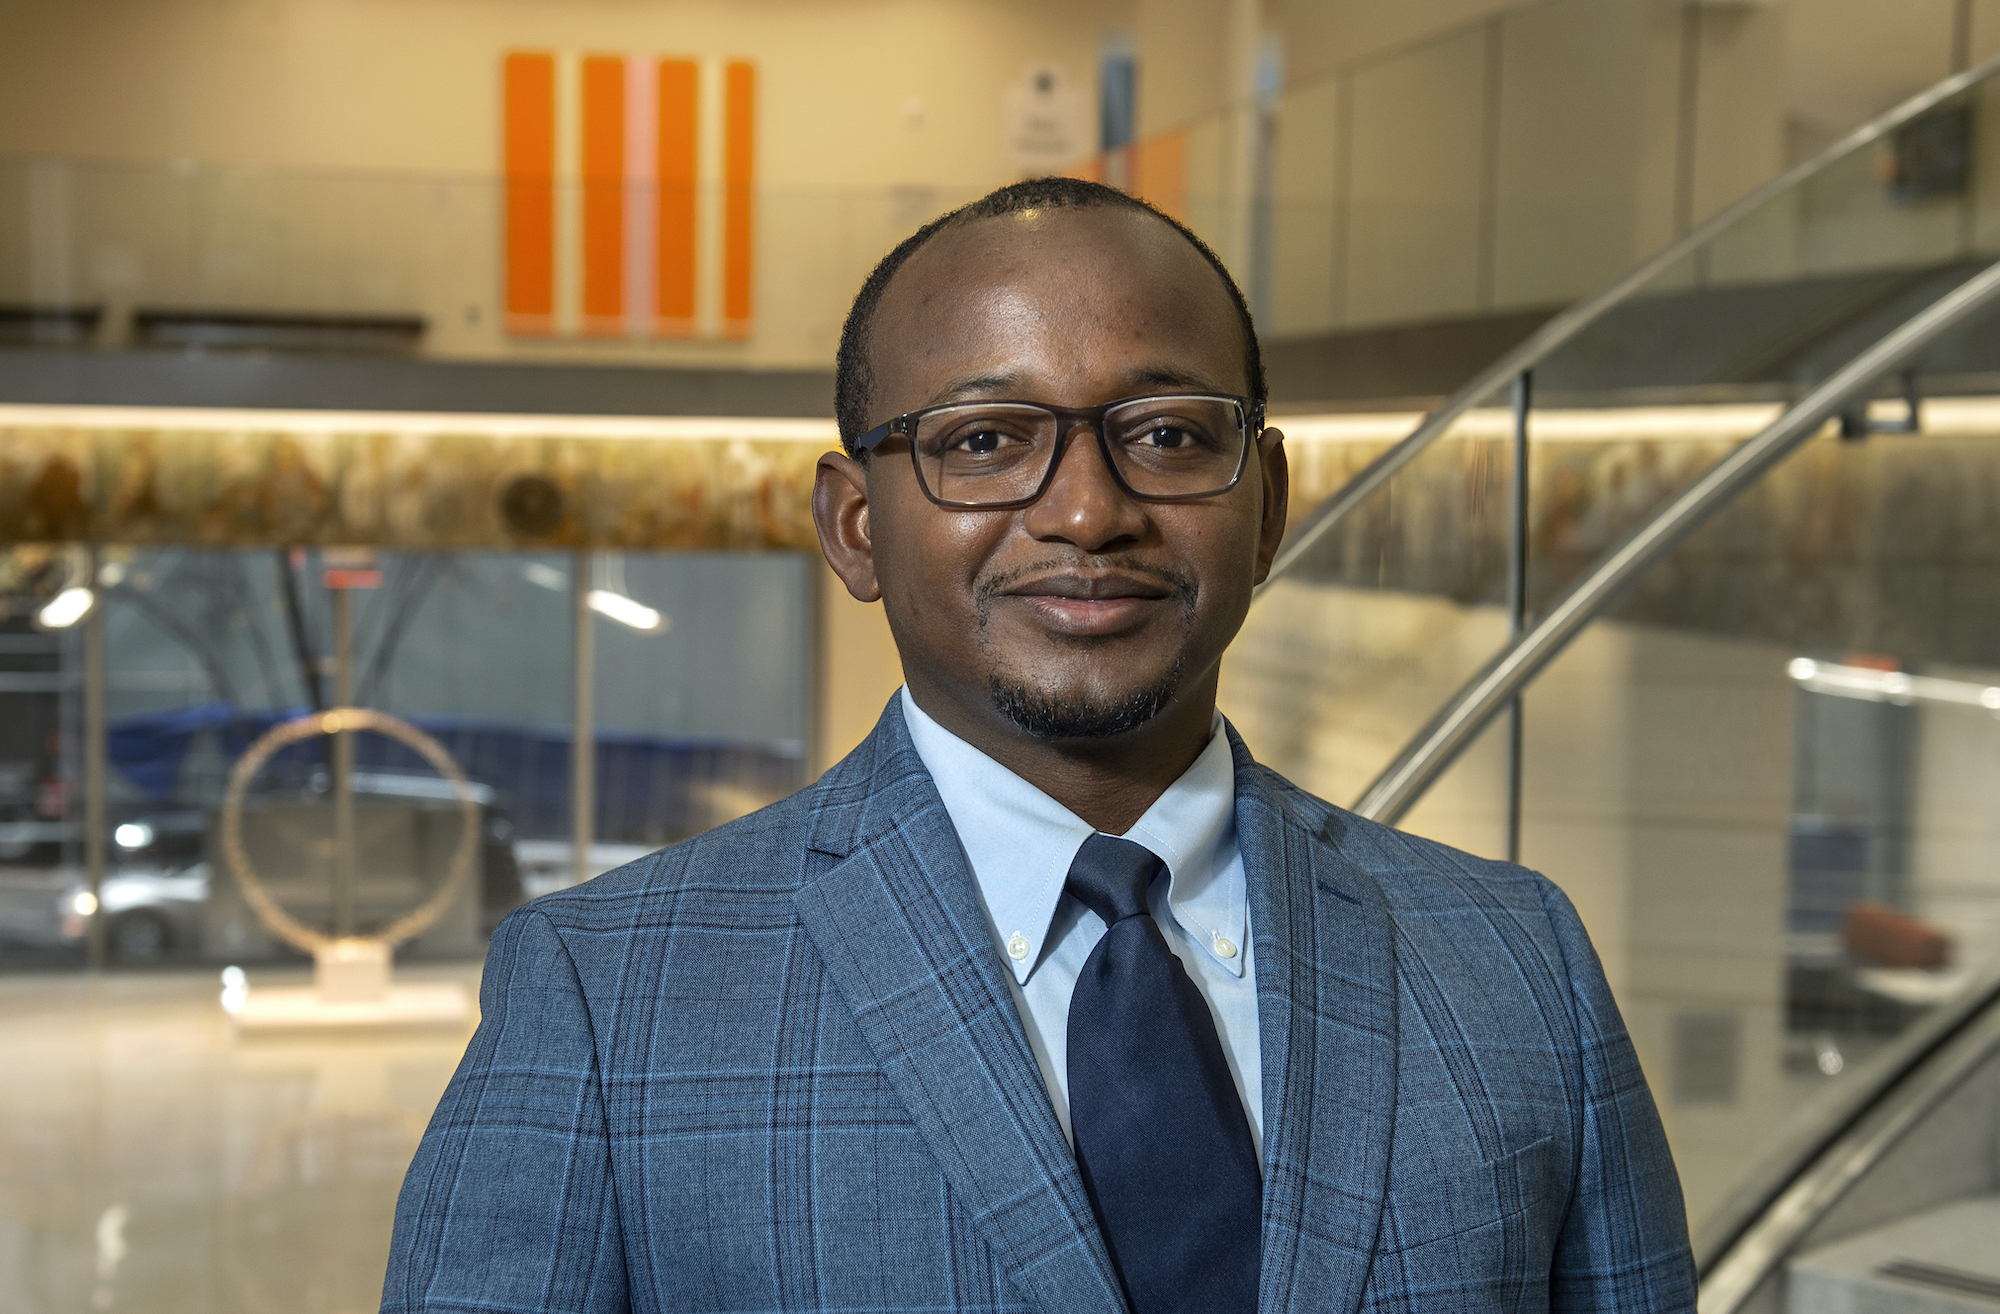 School of Medicine Ph.D. candidate uses national fellowship to advance goal of reducing health disparities